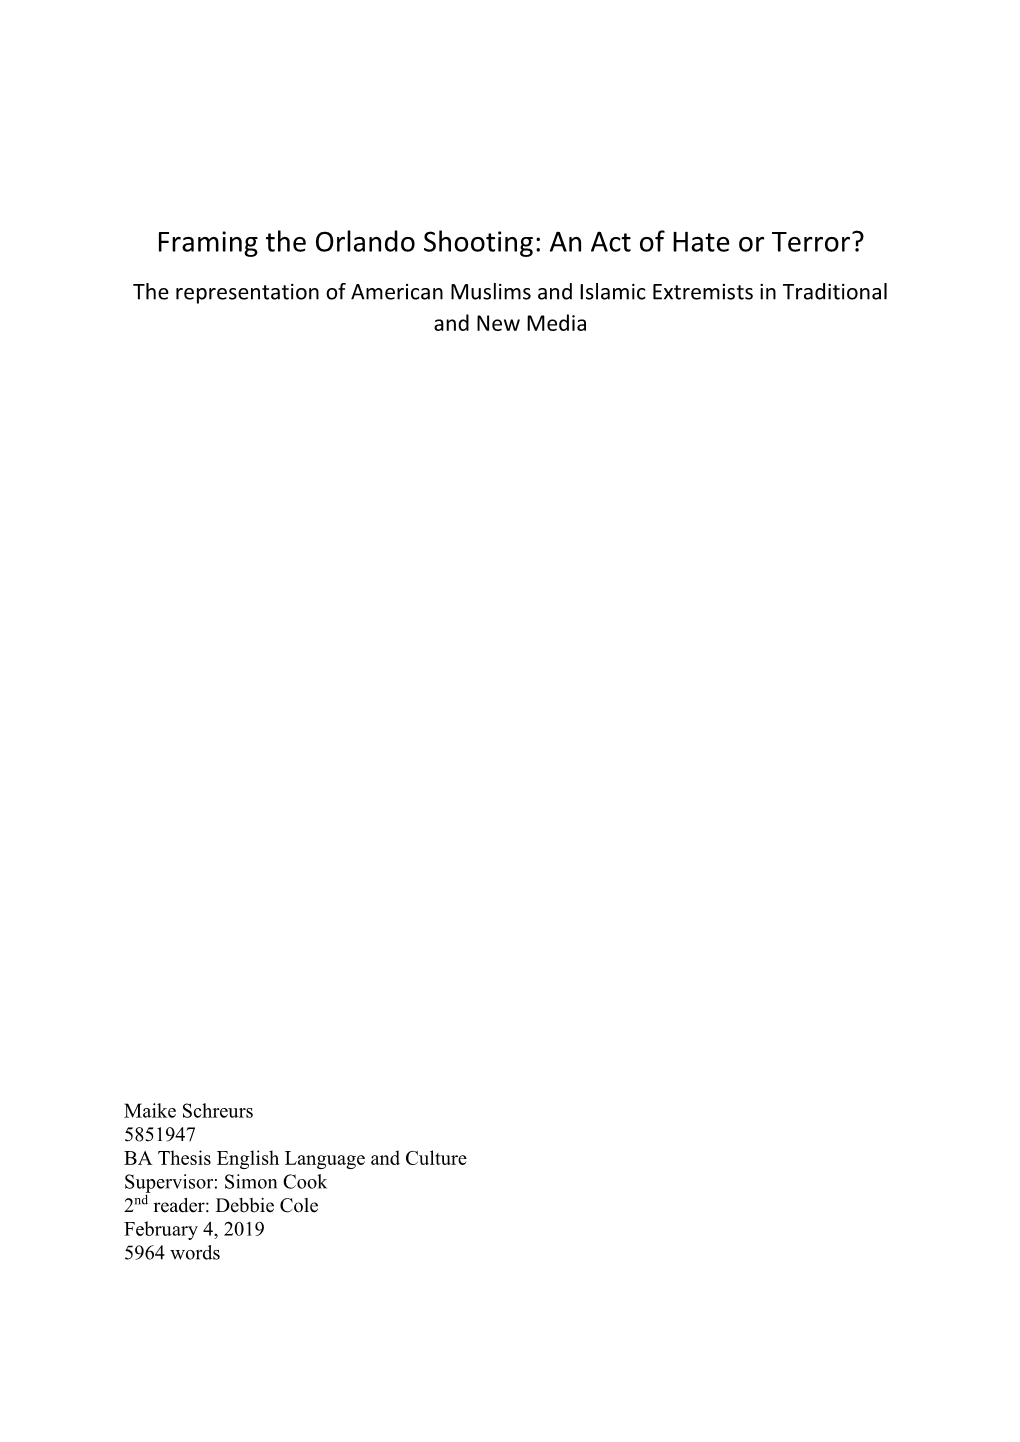 Framing the Orlando Shooting: an Act of Hate Or Terror? the Representation of American Muslims and Islamic Extremists in Traditional and New Media